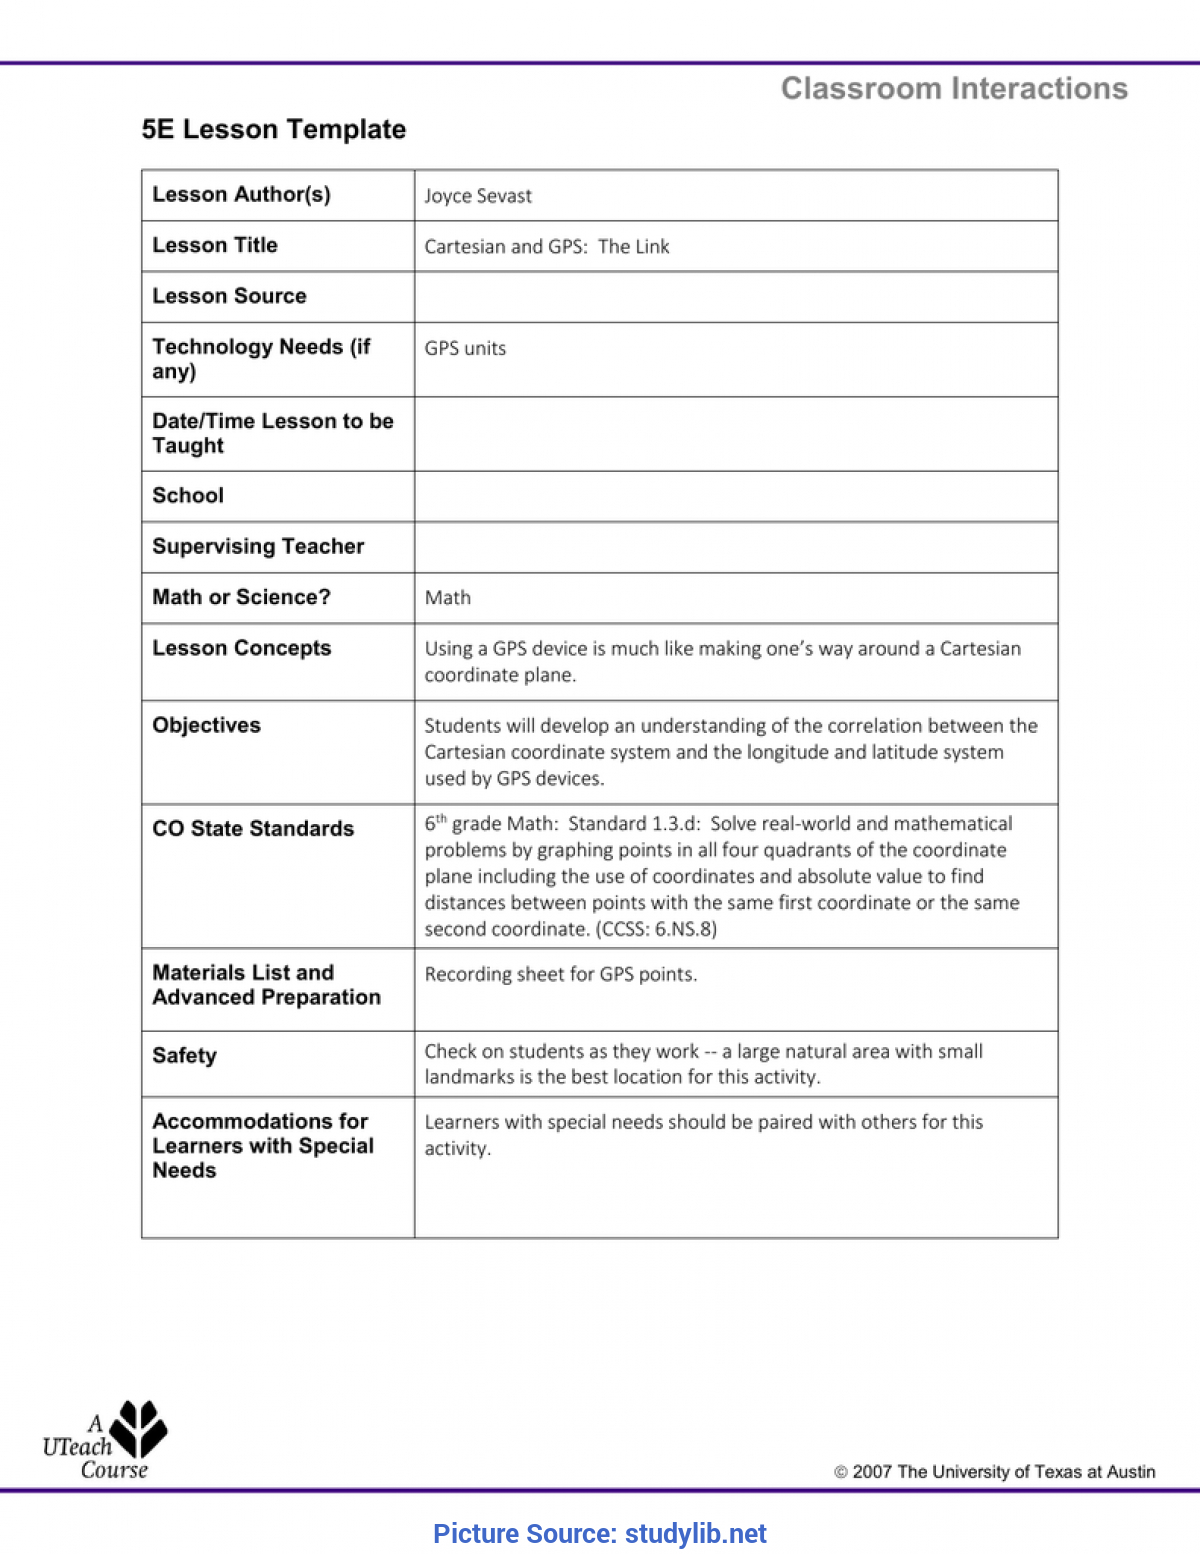 Typical Lesson Plan Sample 5E And Texas Classroom